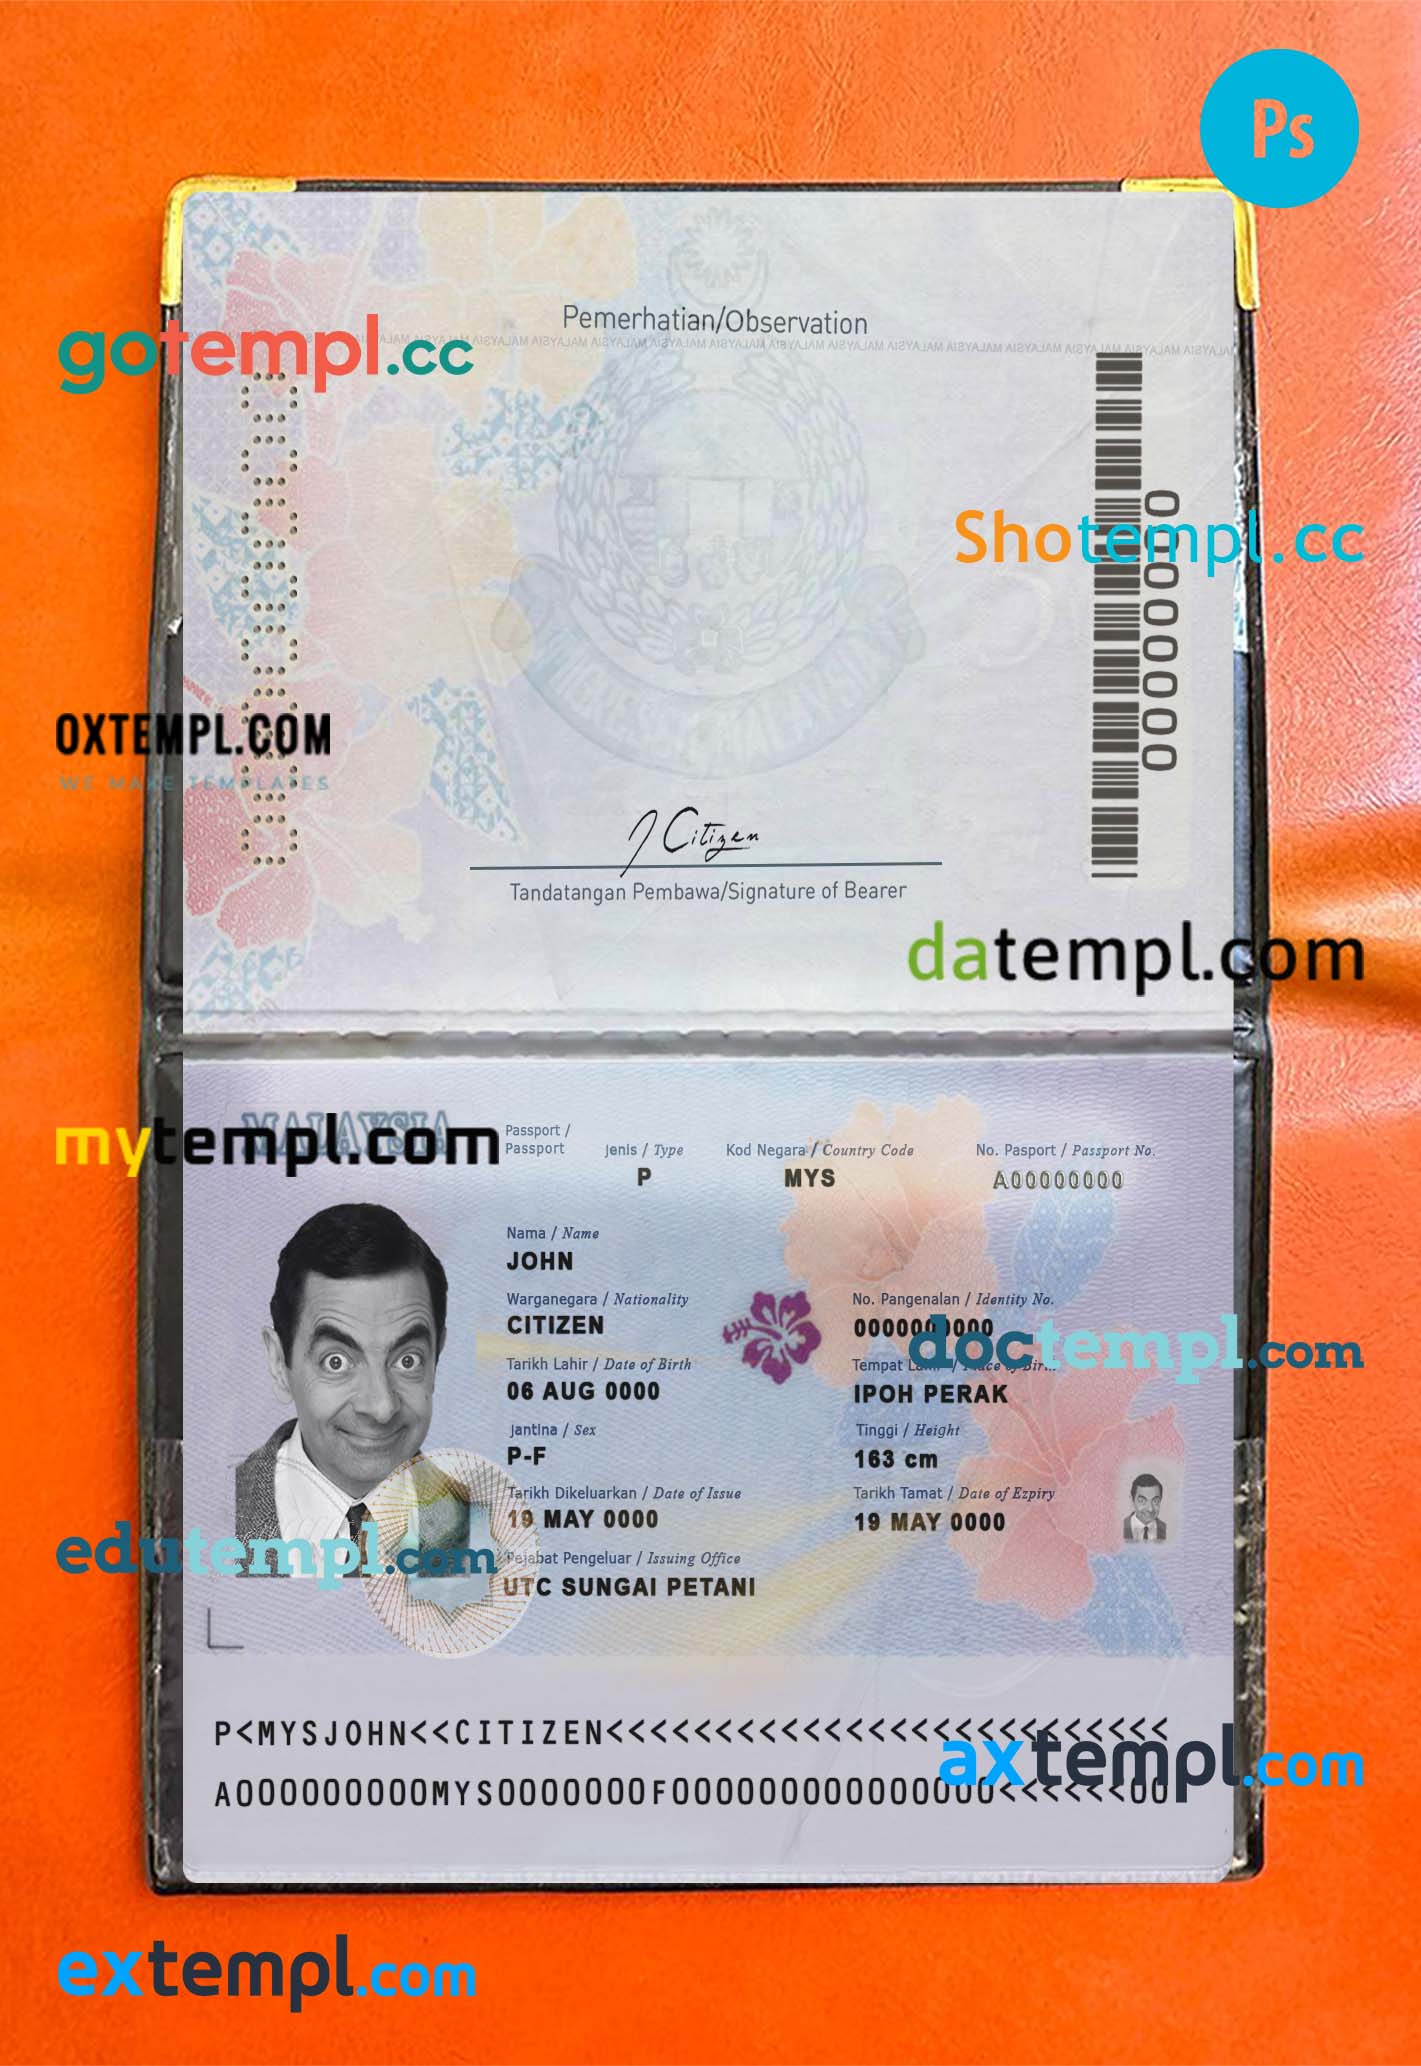 Kyrgyzstan passport editable PSD files, scan and photo look templates, 2 in 1